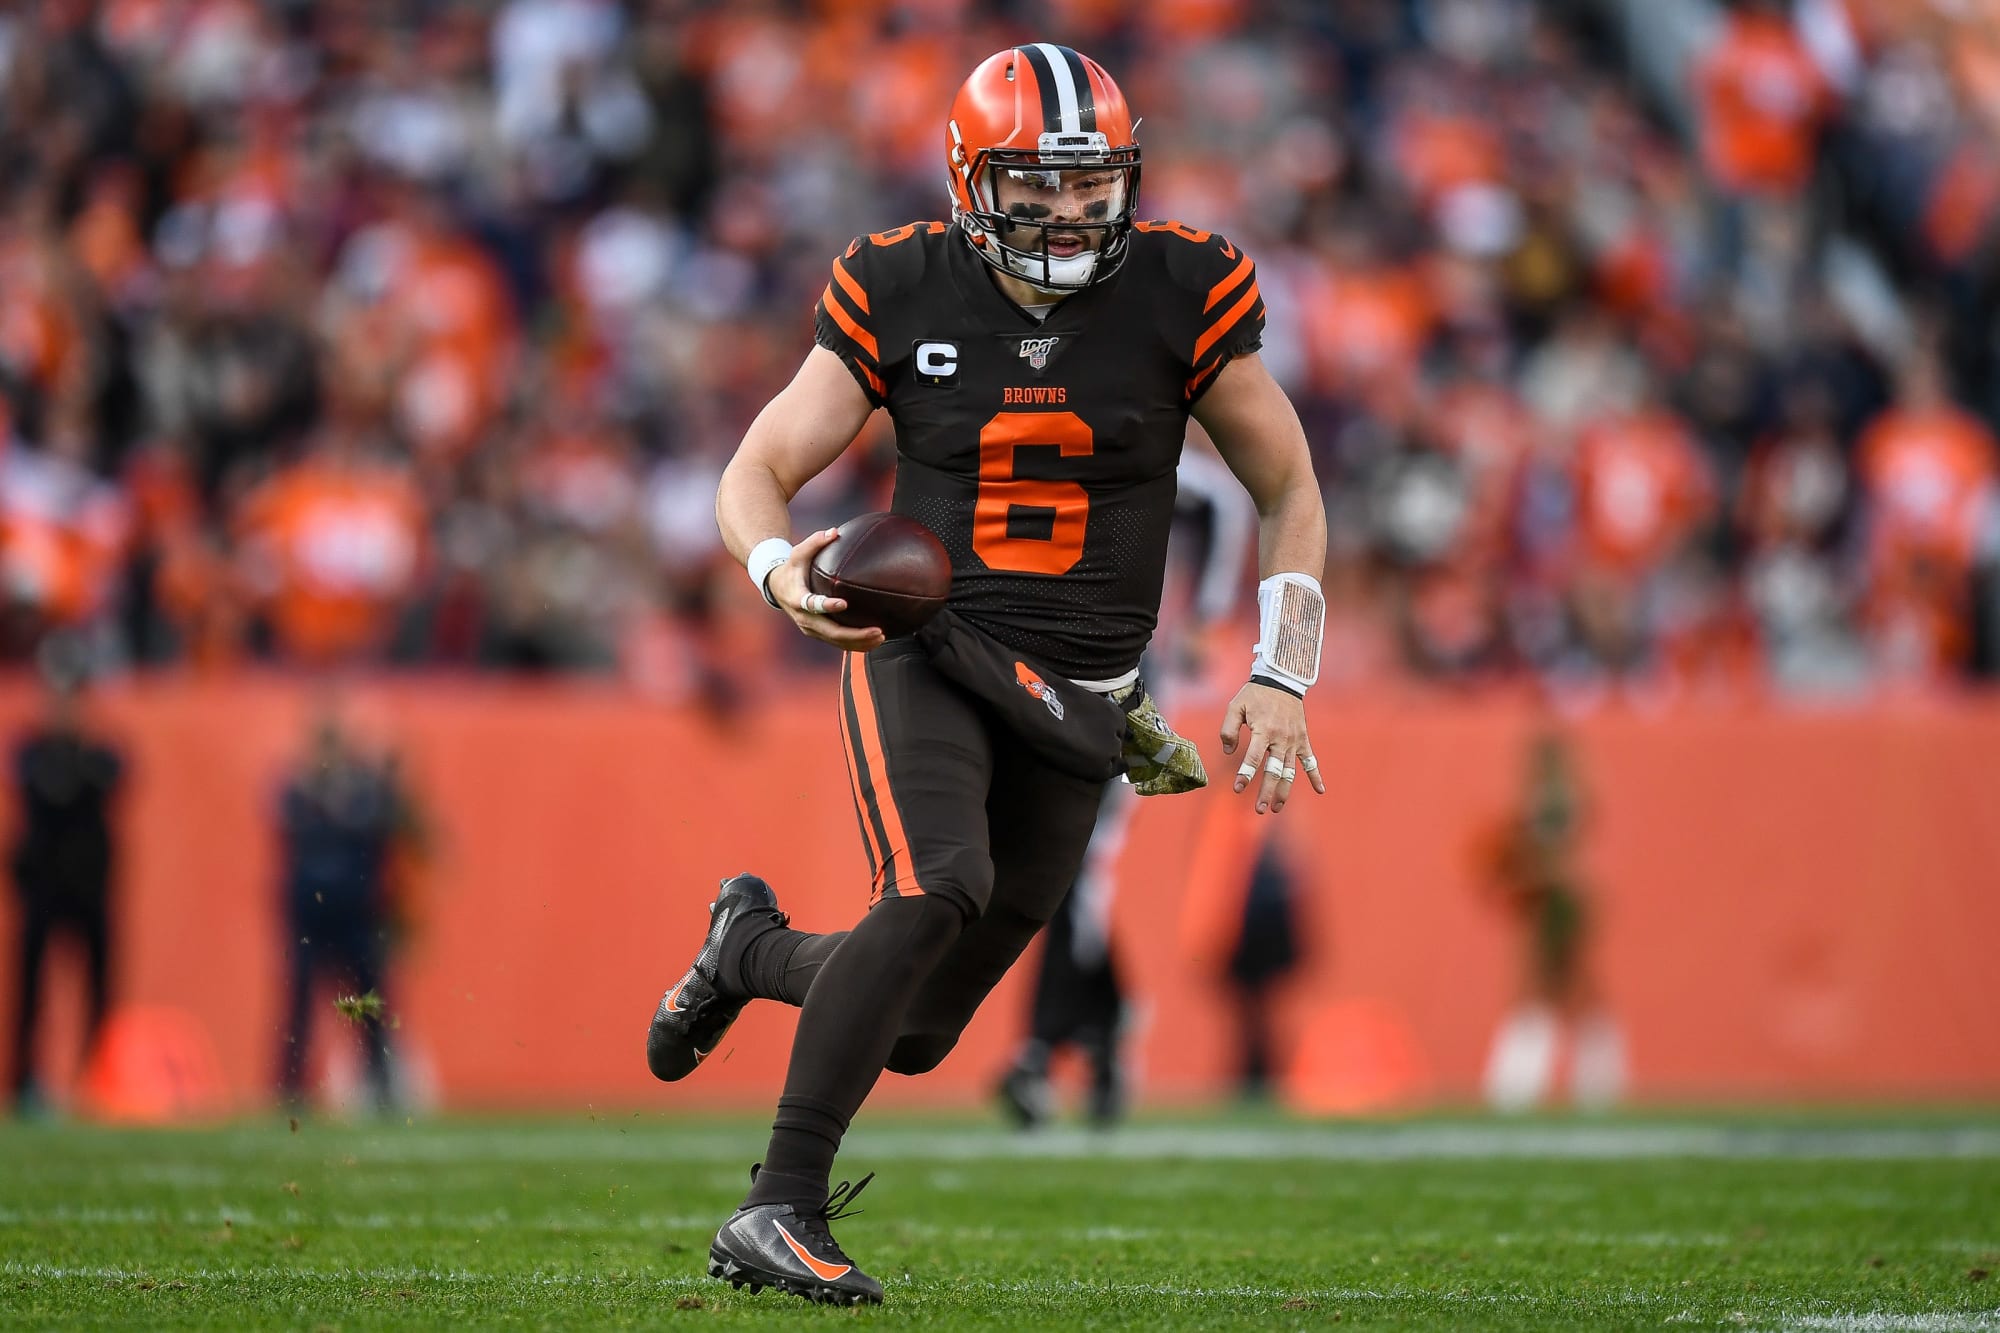 Cleveland Browns vs. Bills live stream How to watch online, game